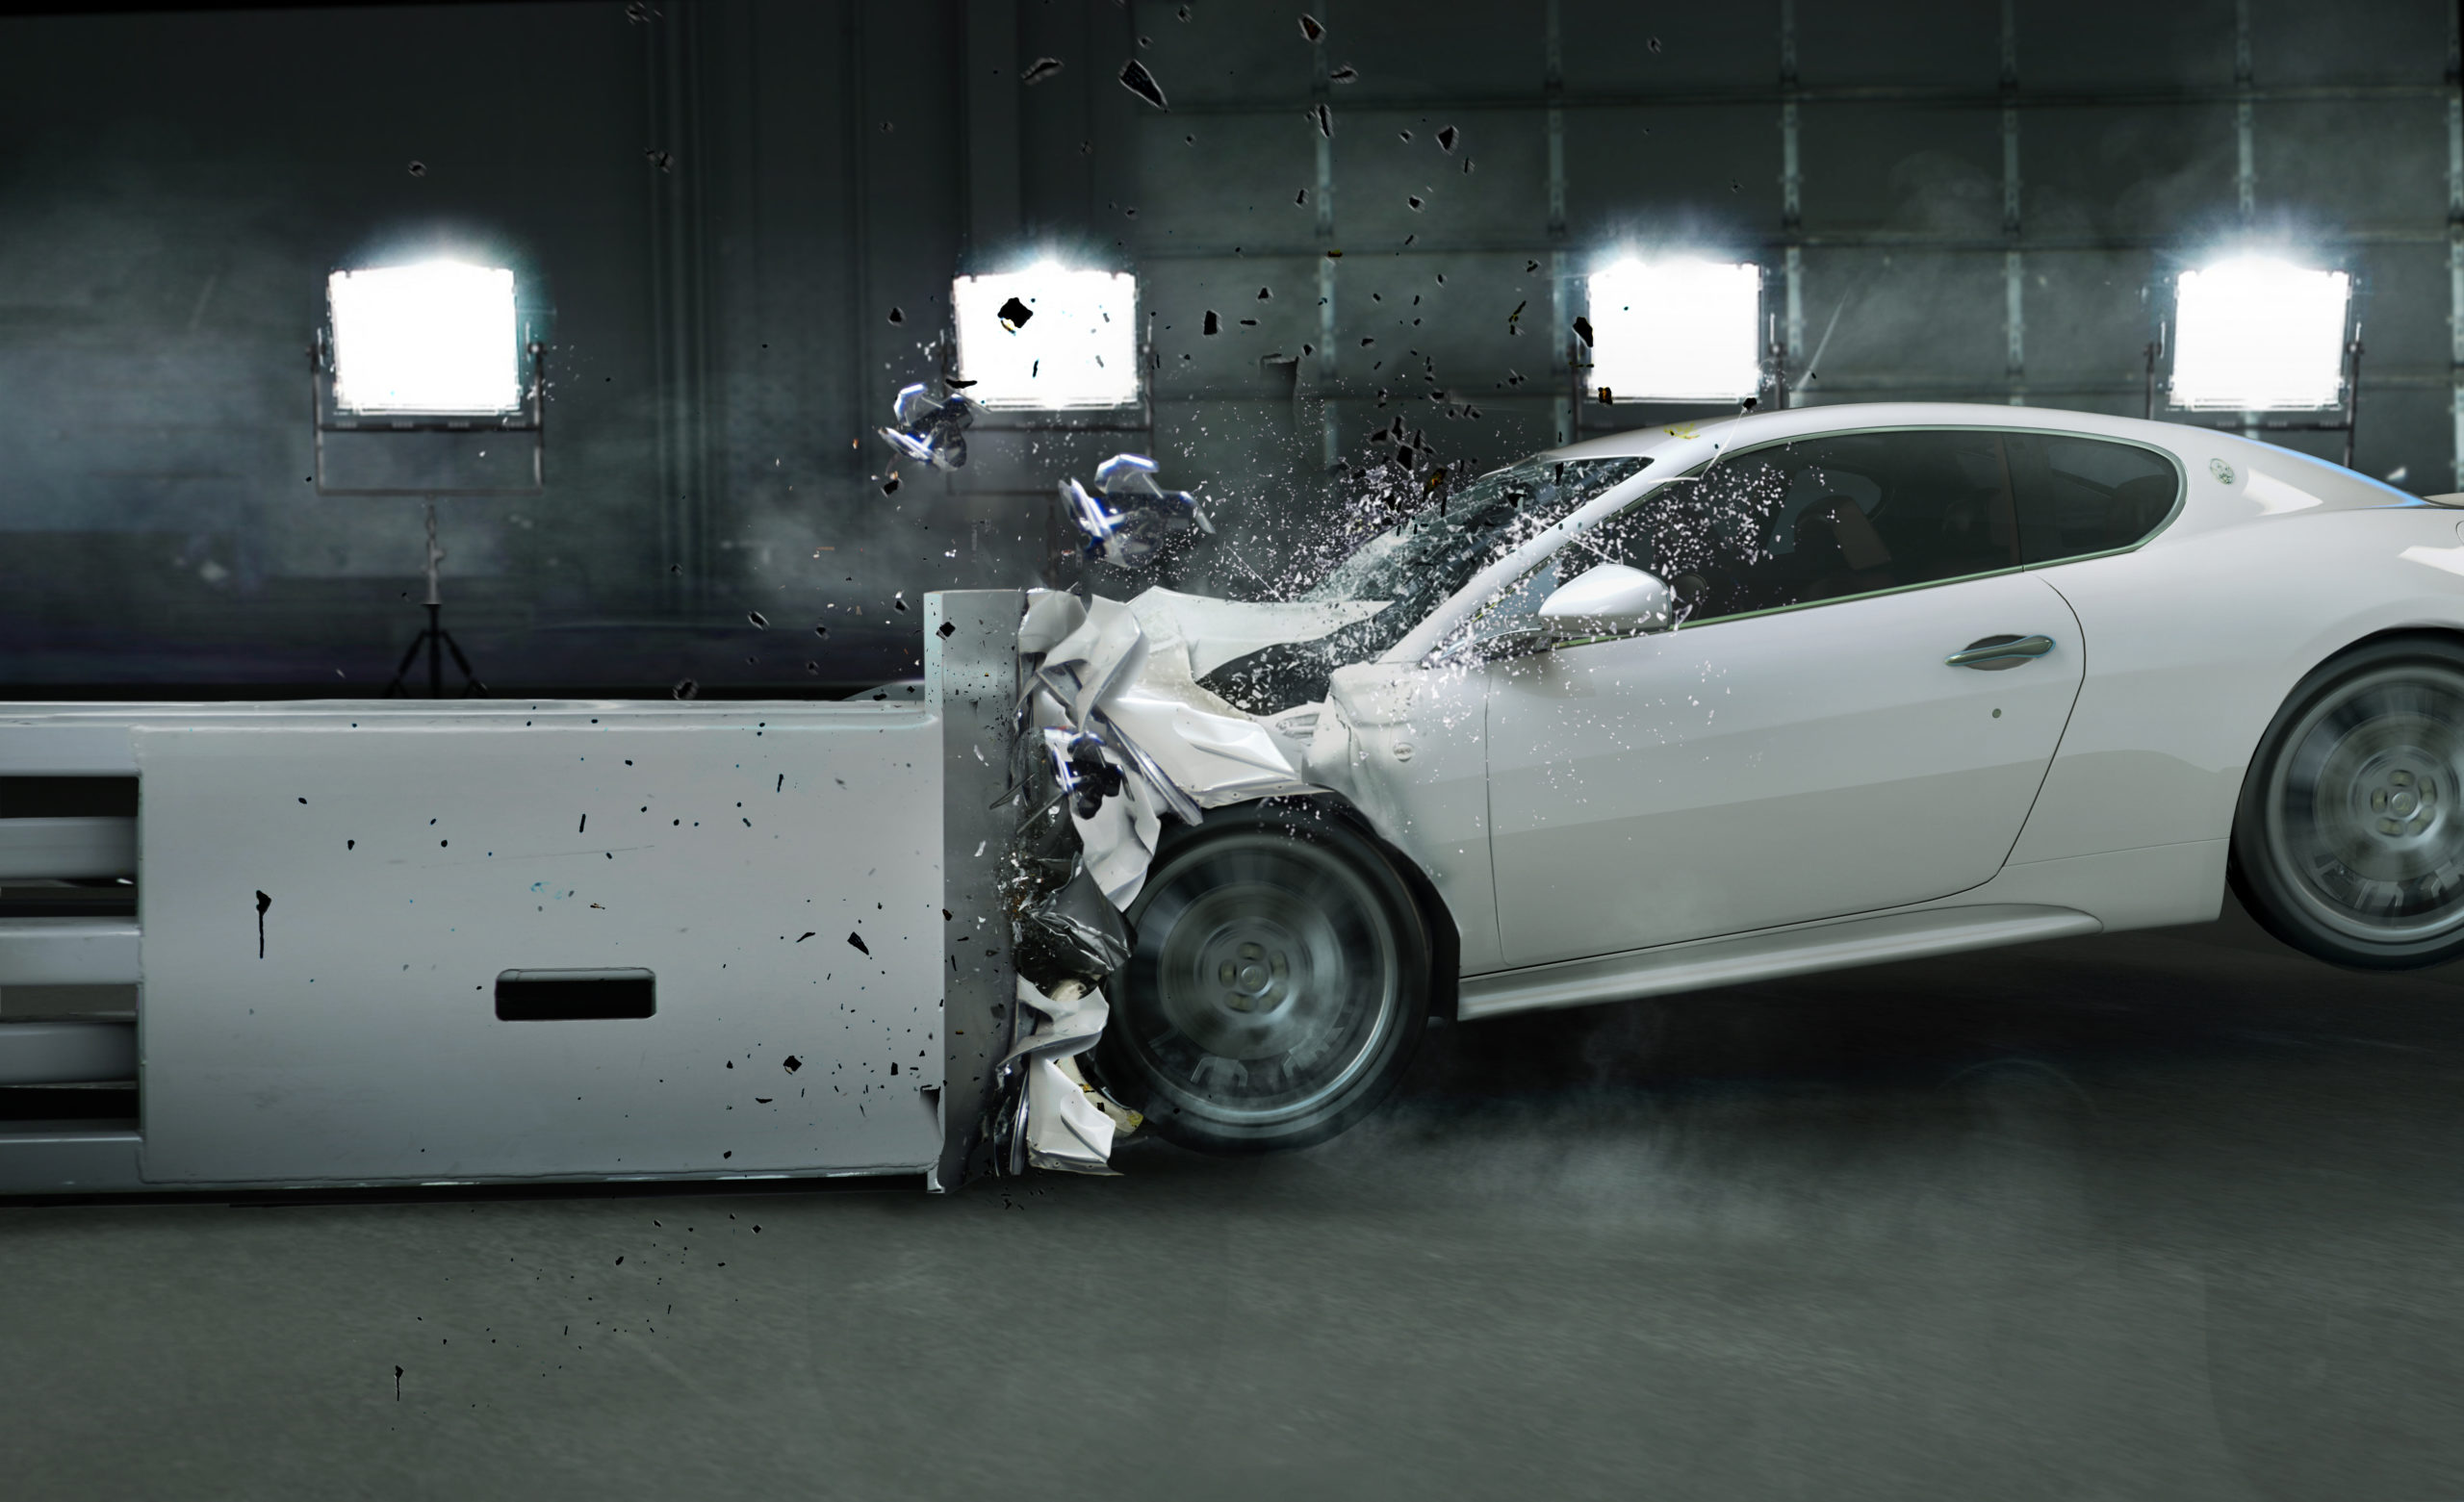 IIHS: Teens Are the Riskiest Drivers, But Drive the Least Safe Vehicles | THE SHOP